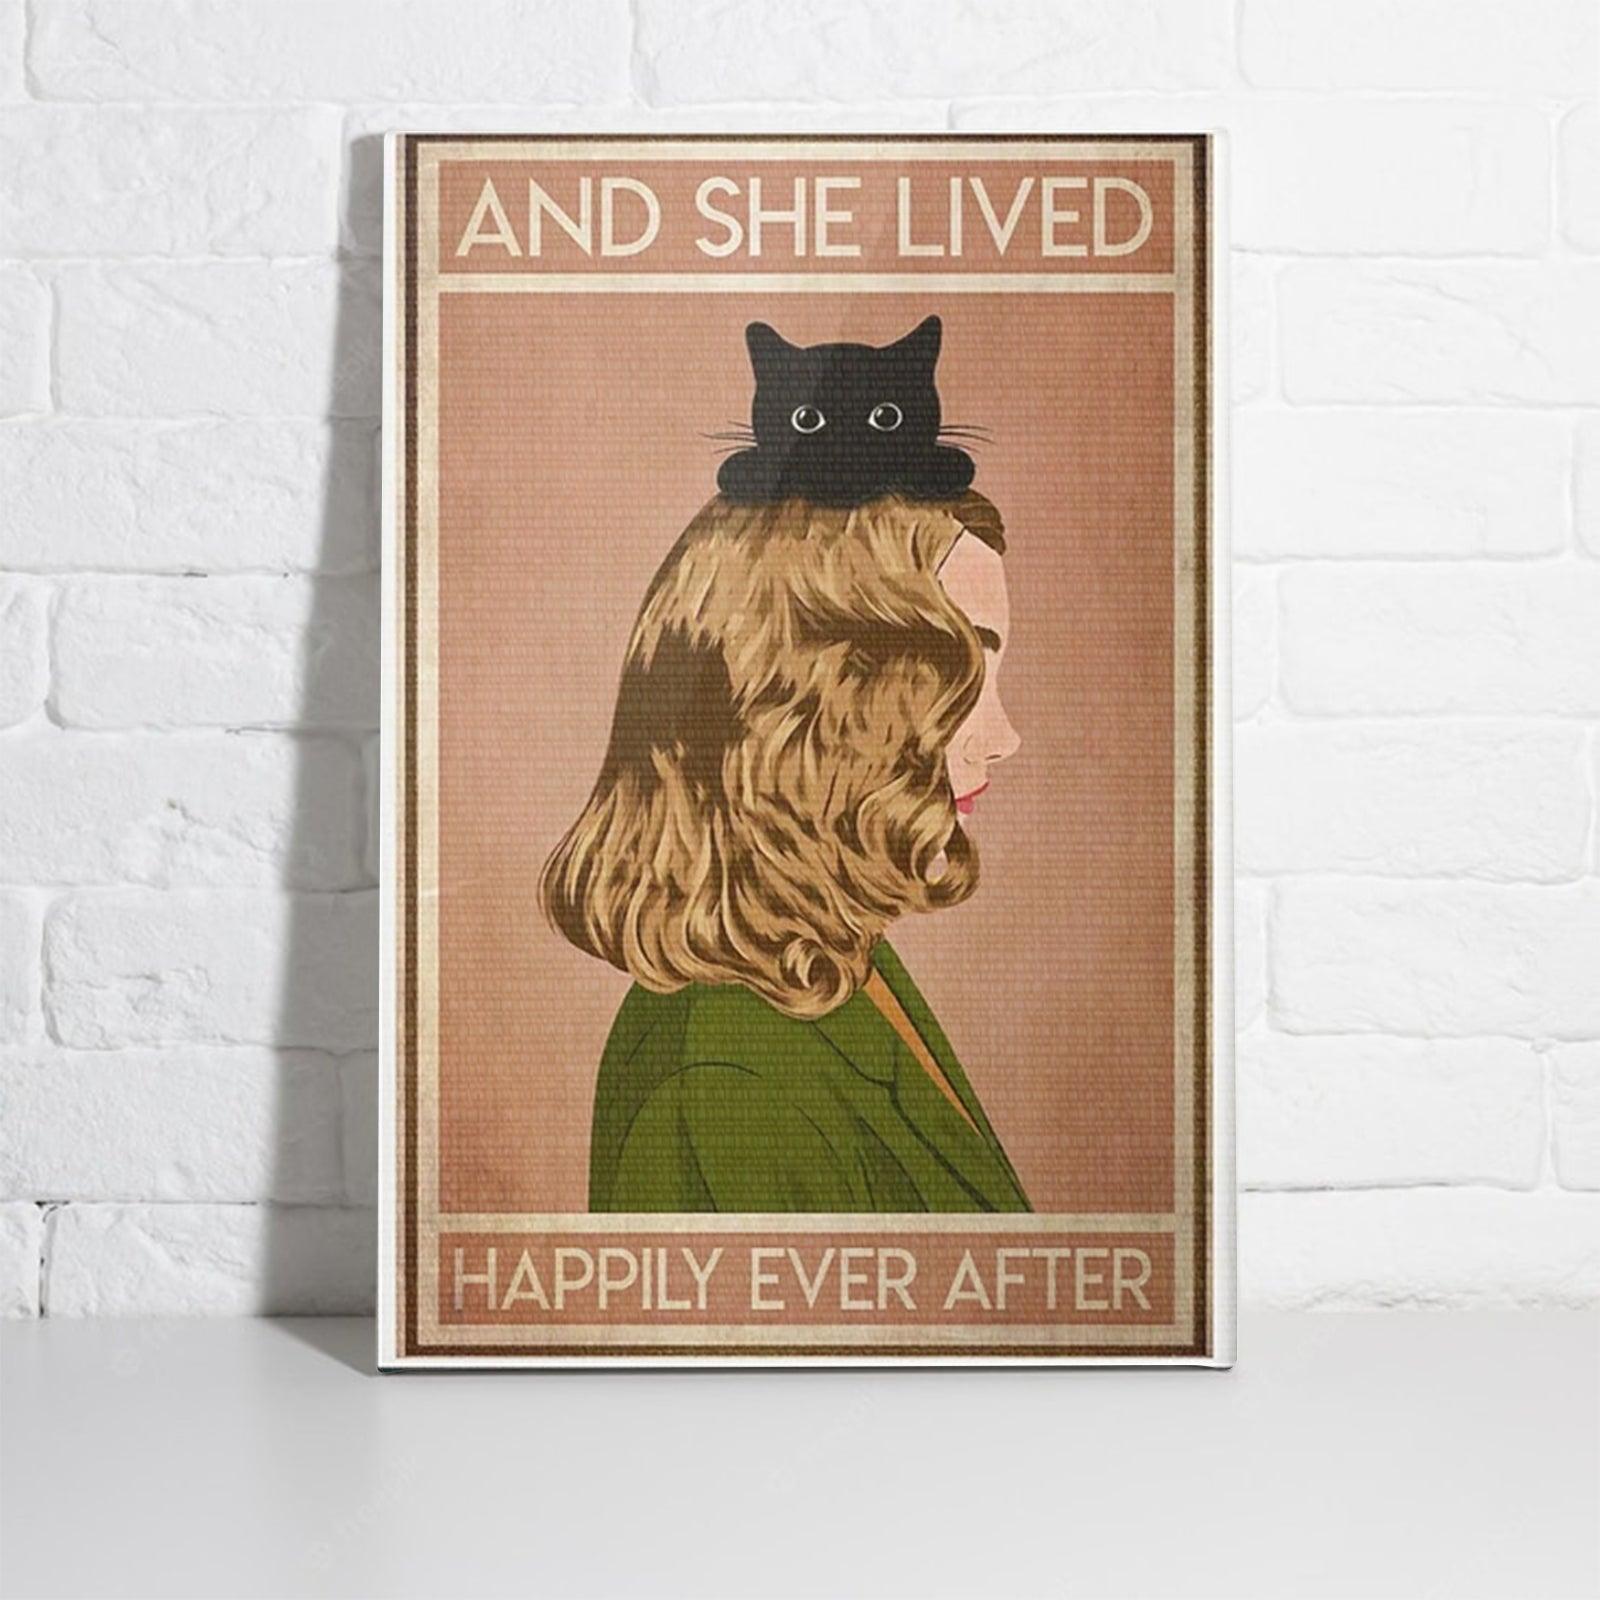 Black Cat Portrait Canvas - Black Cat And She Lived Happily Ever After Premium Wrapped Canvas - Perfect Gift For Cat Lovers, Black Cat Owners - Amzanimalsgift